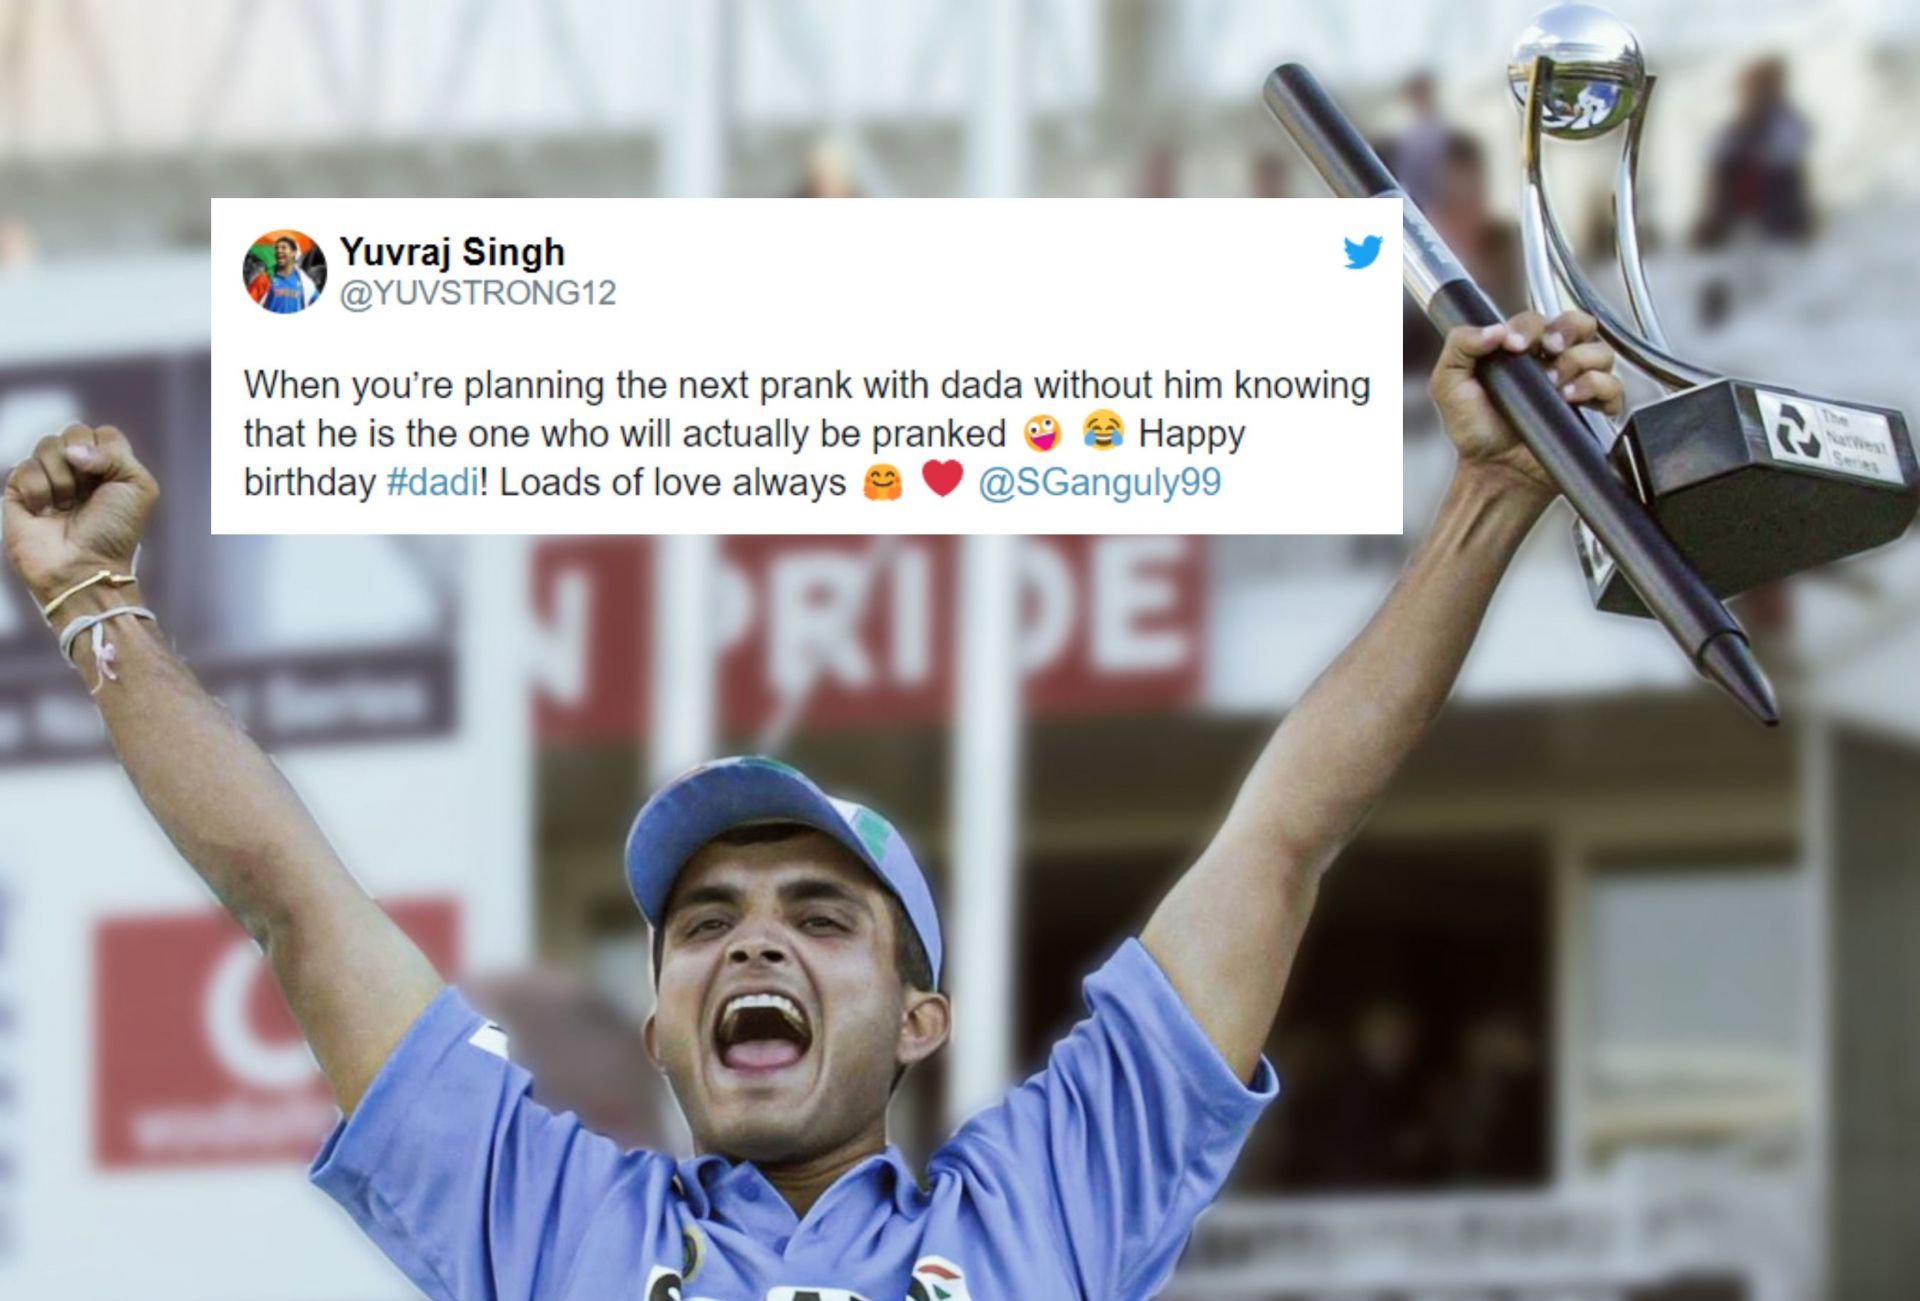 Ganguly received special wishes on Saturday as he turned 51.